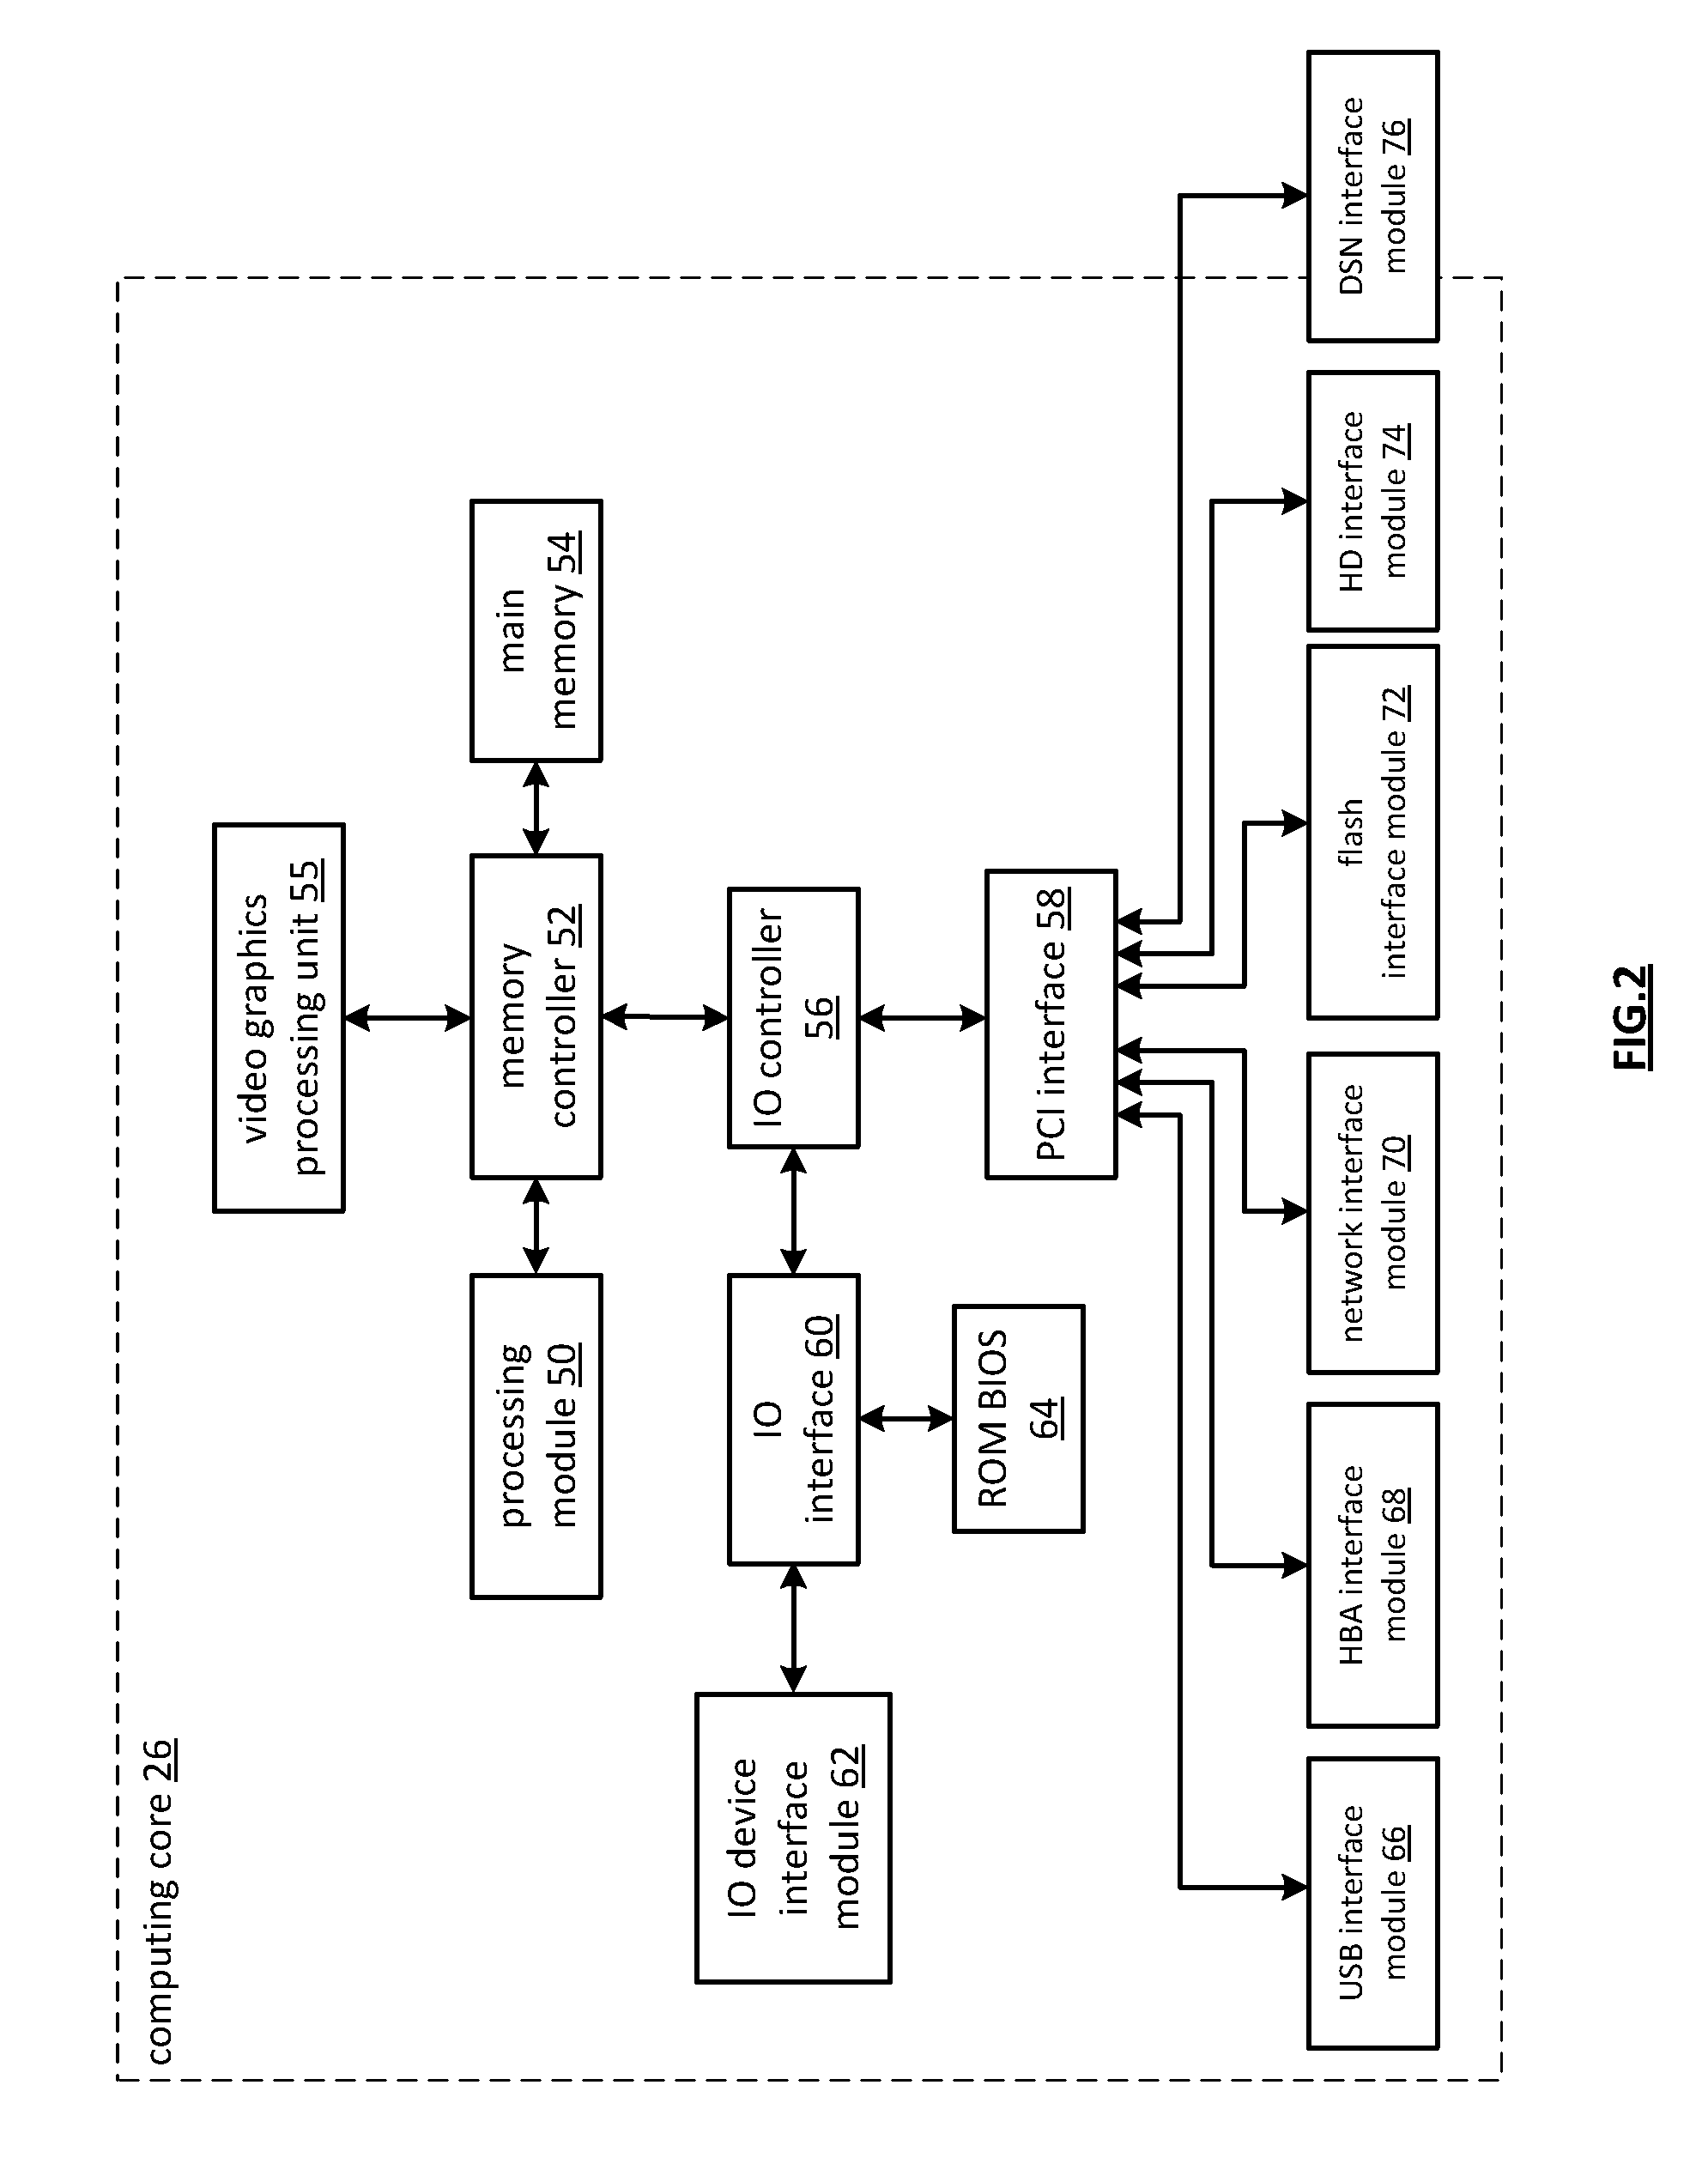 Large scale subscription based dispersed storage network